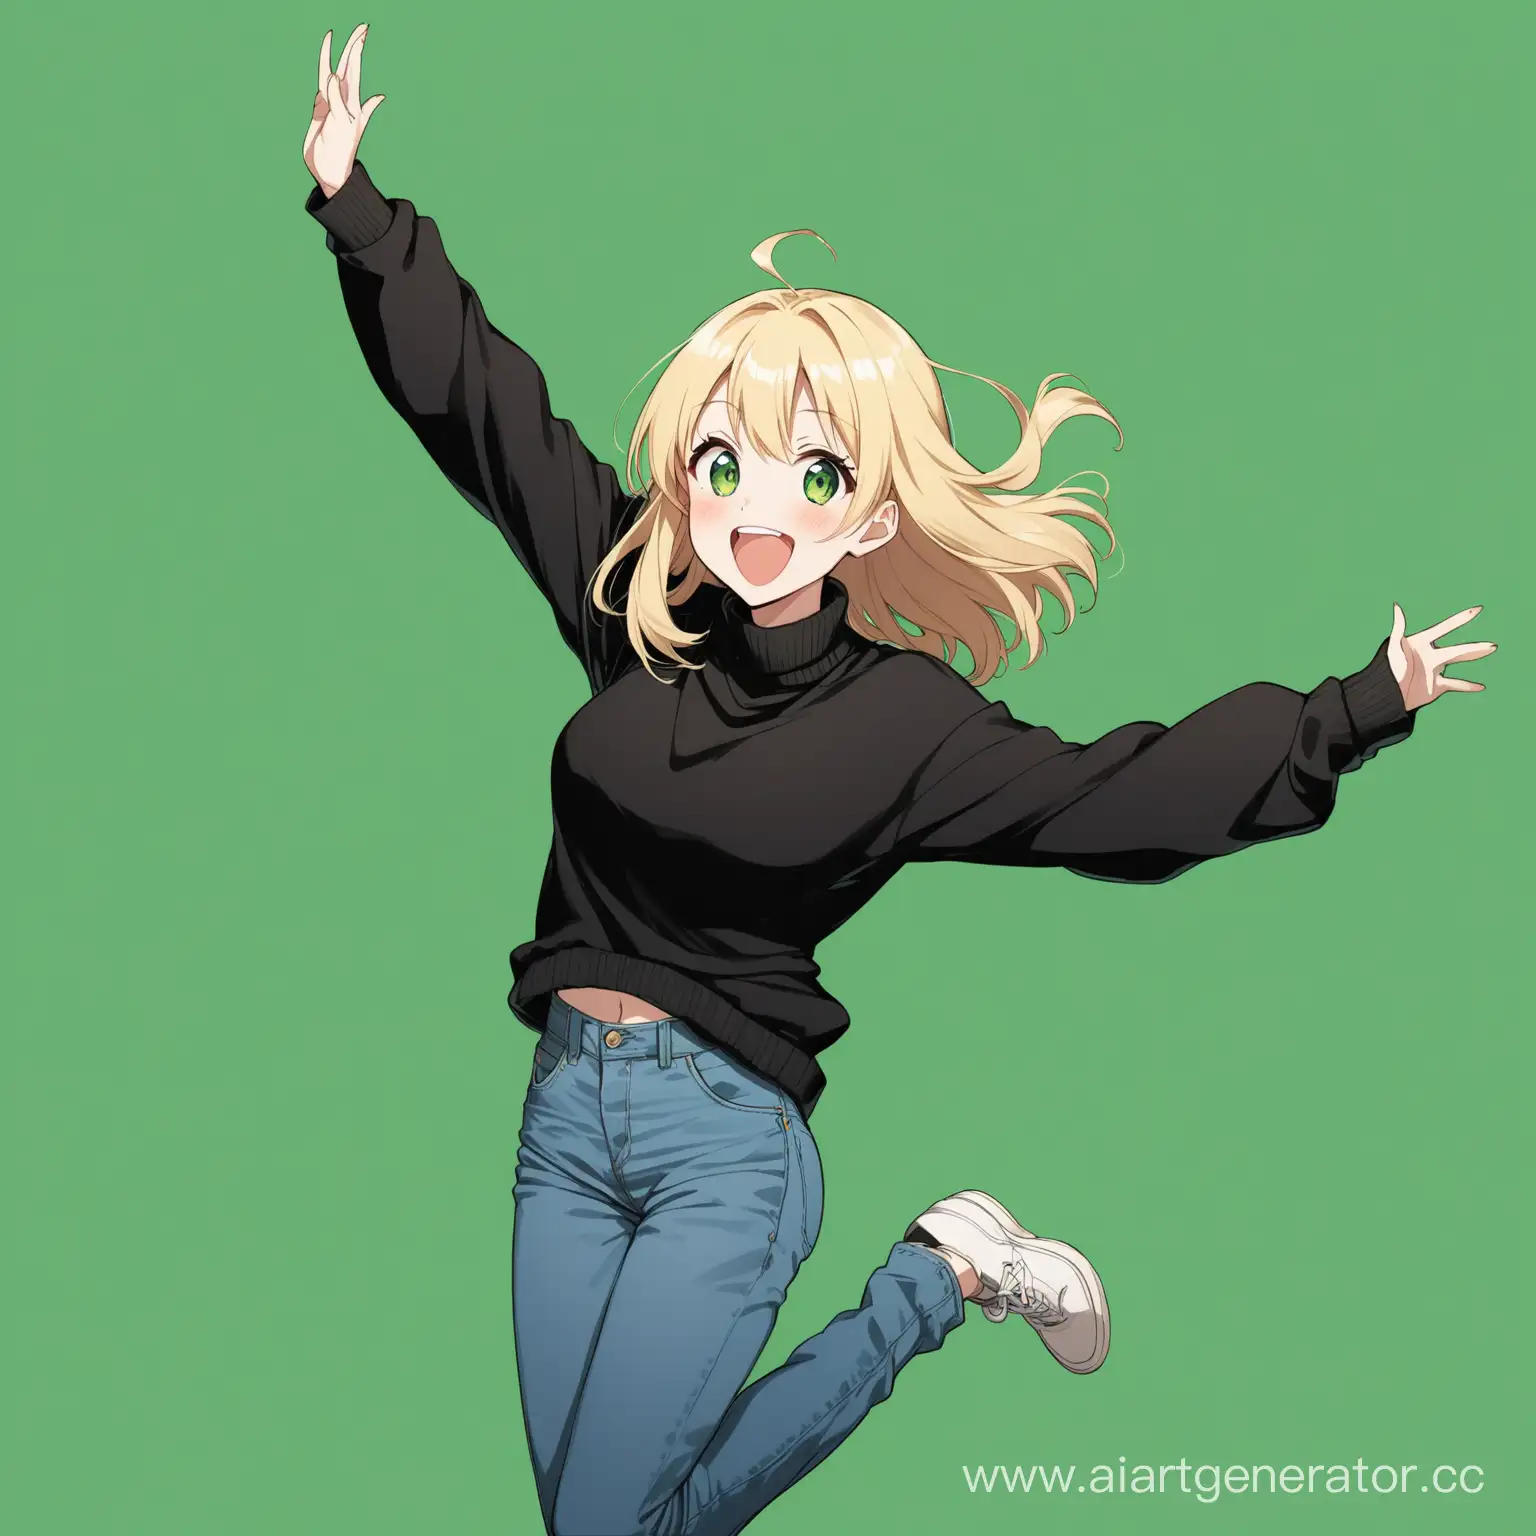 Blonde-Anime-Girl-in-Black-Sweater-Excited-on-Green-Background